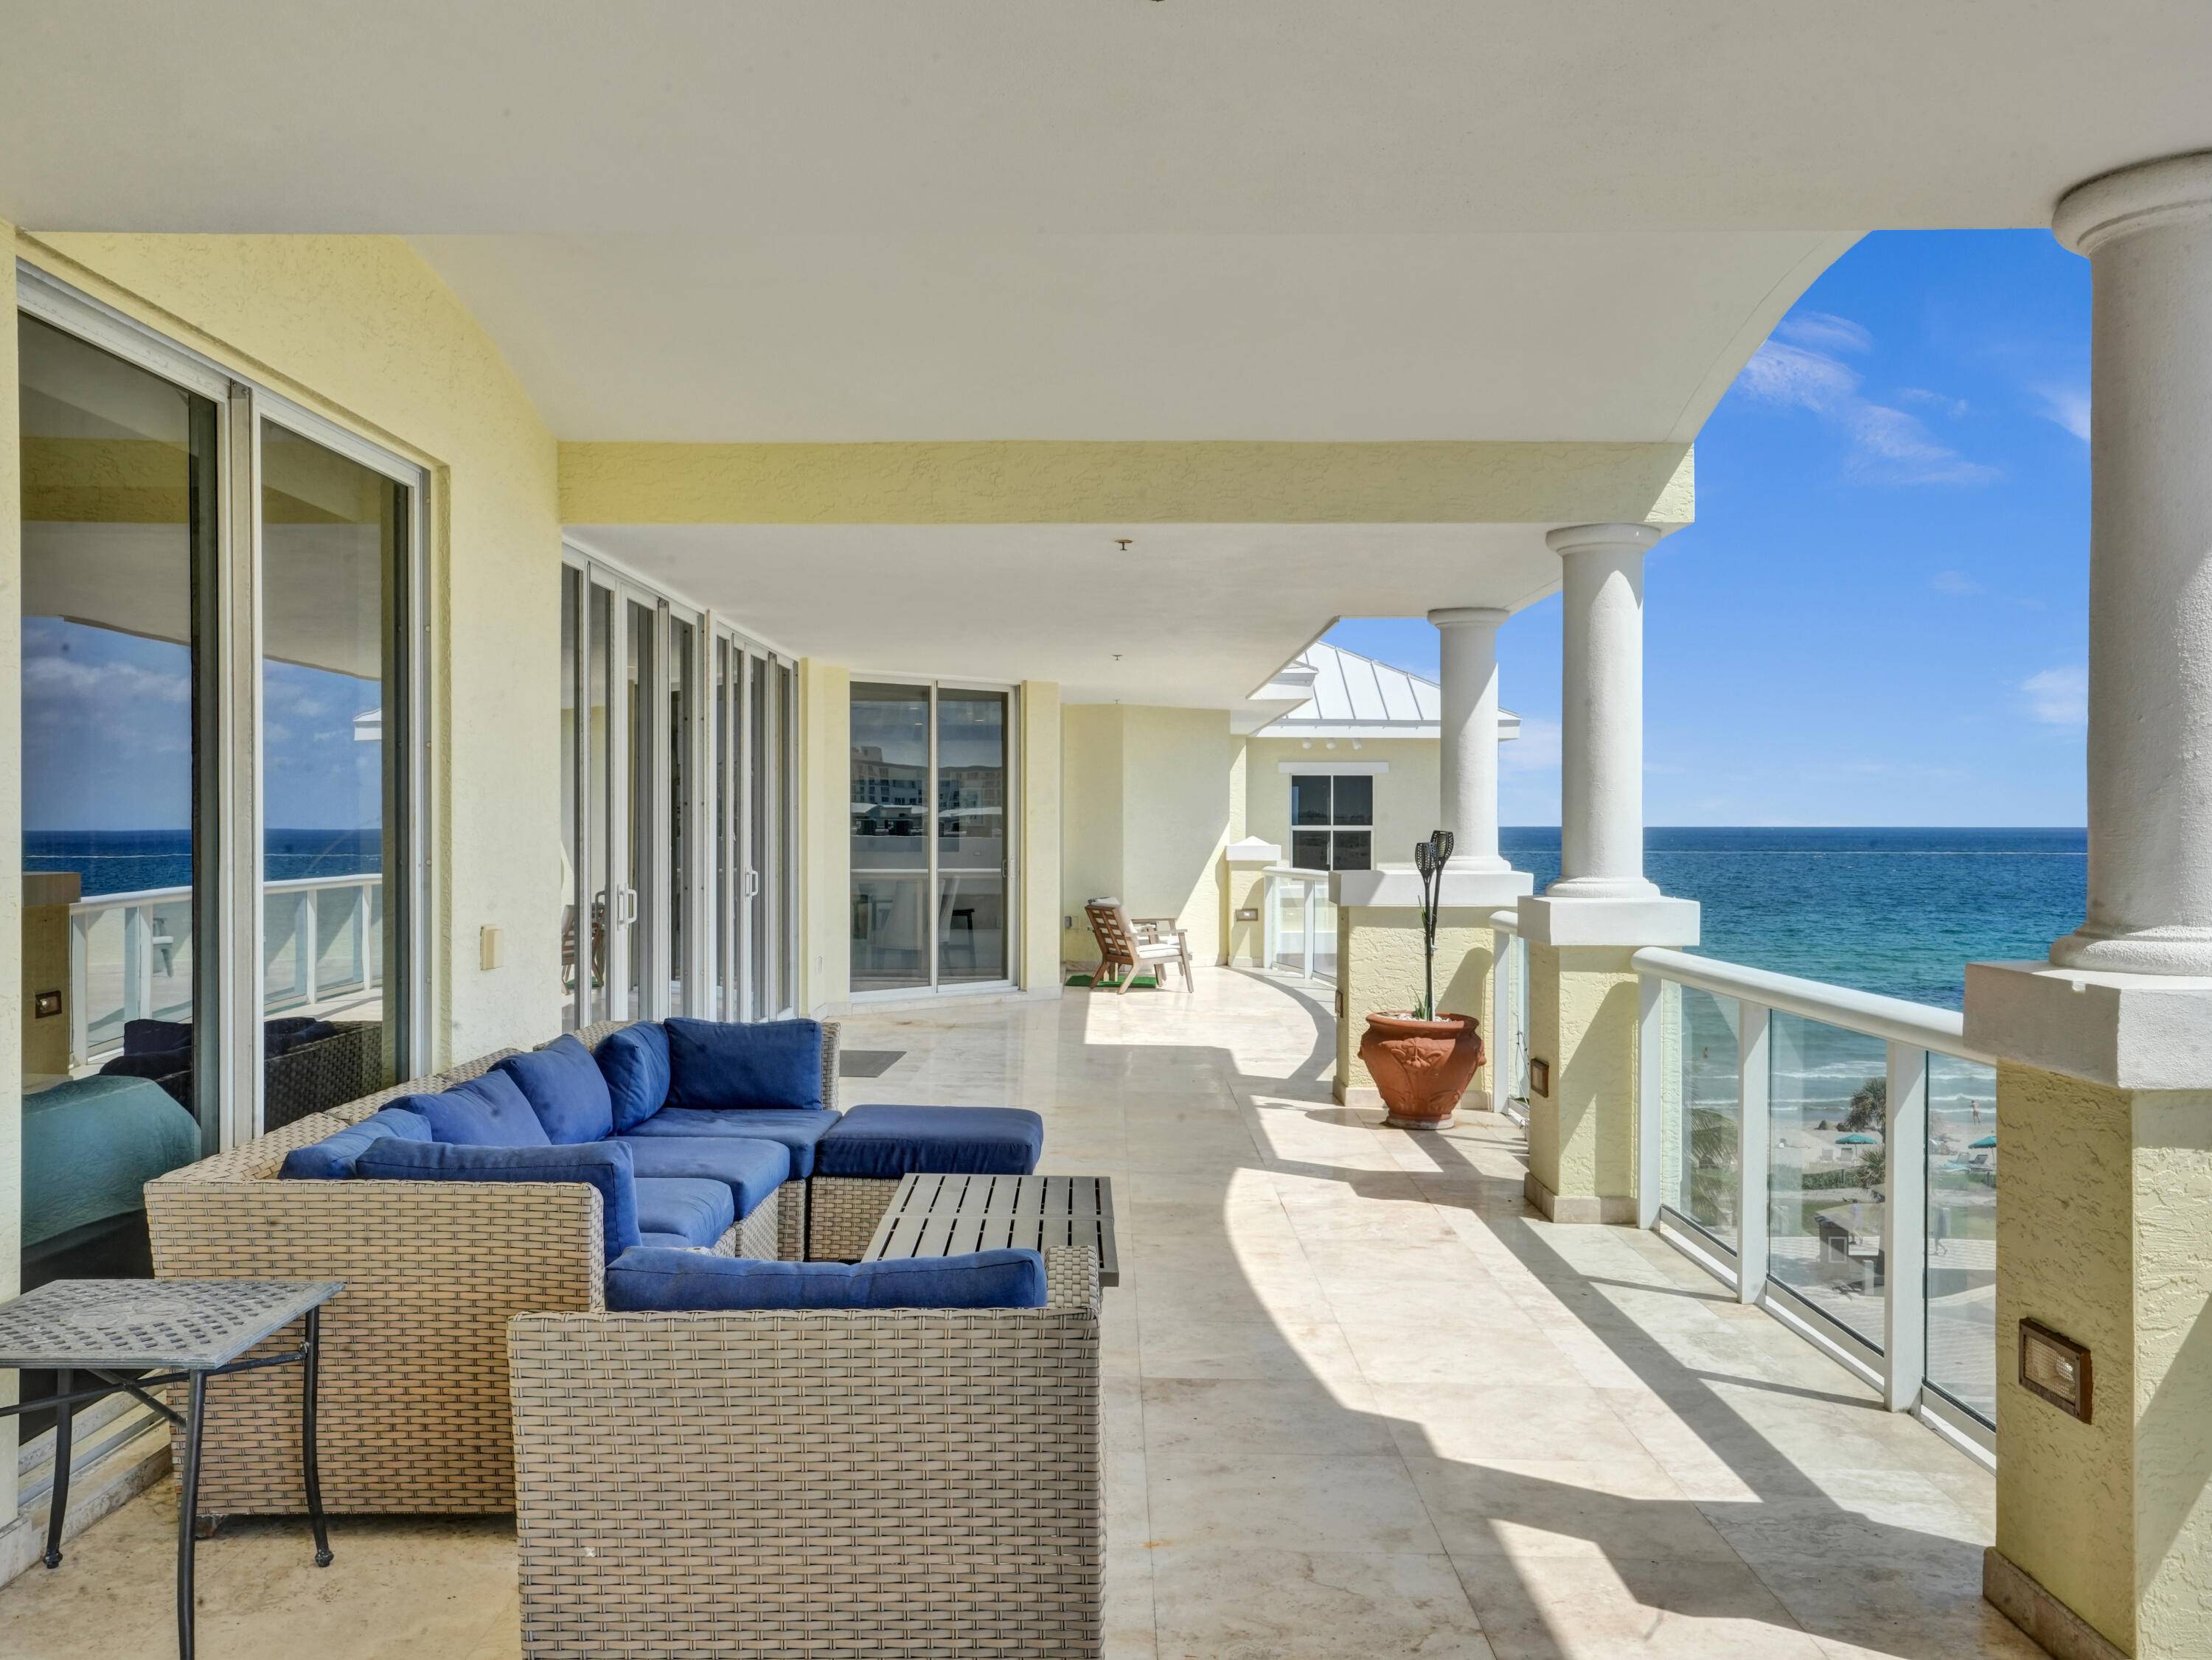 Rare opportunity to enjoy the best of ocean front living at the luxurious, 24 hour concierge service Ocean Plaza, overlooking the glistening waters of the Atlantic Ocean.